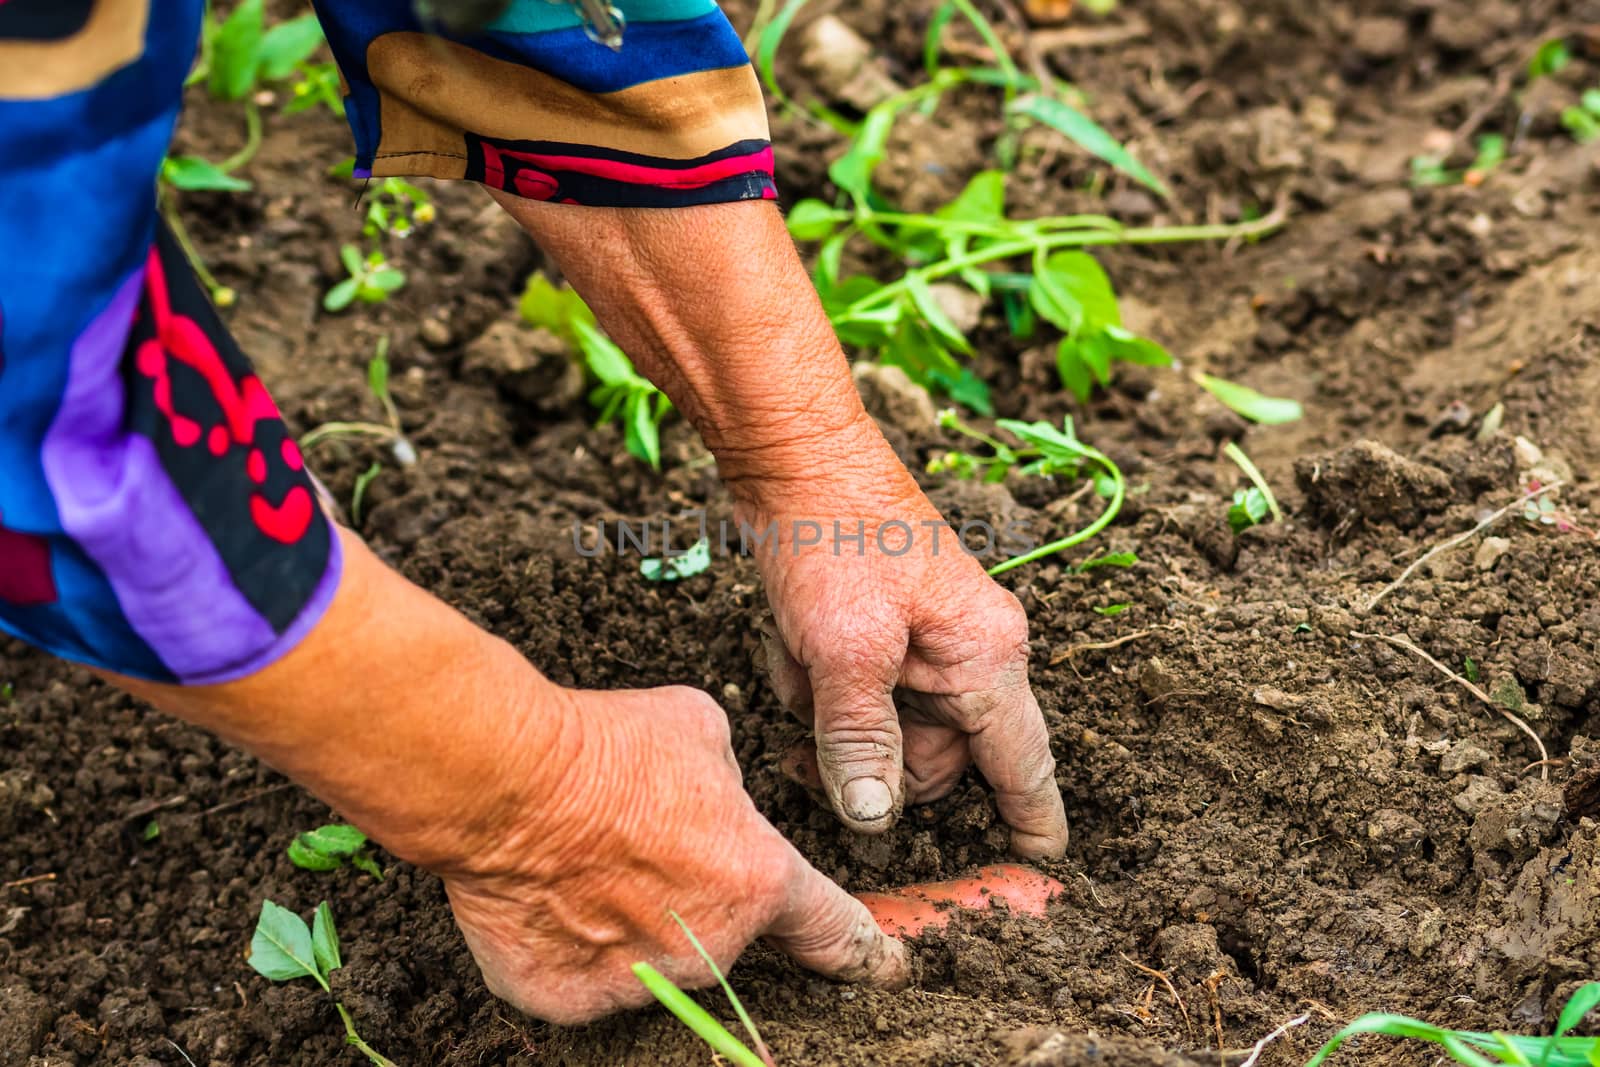 Harvesting and digging potatoes with hoe and hand in garden. Dig by vladispas